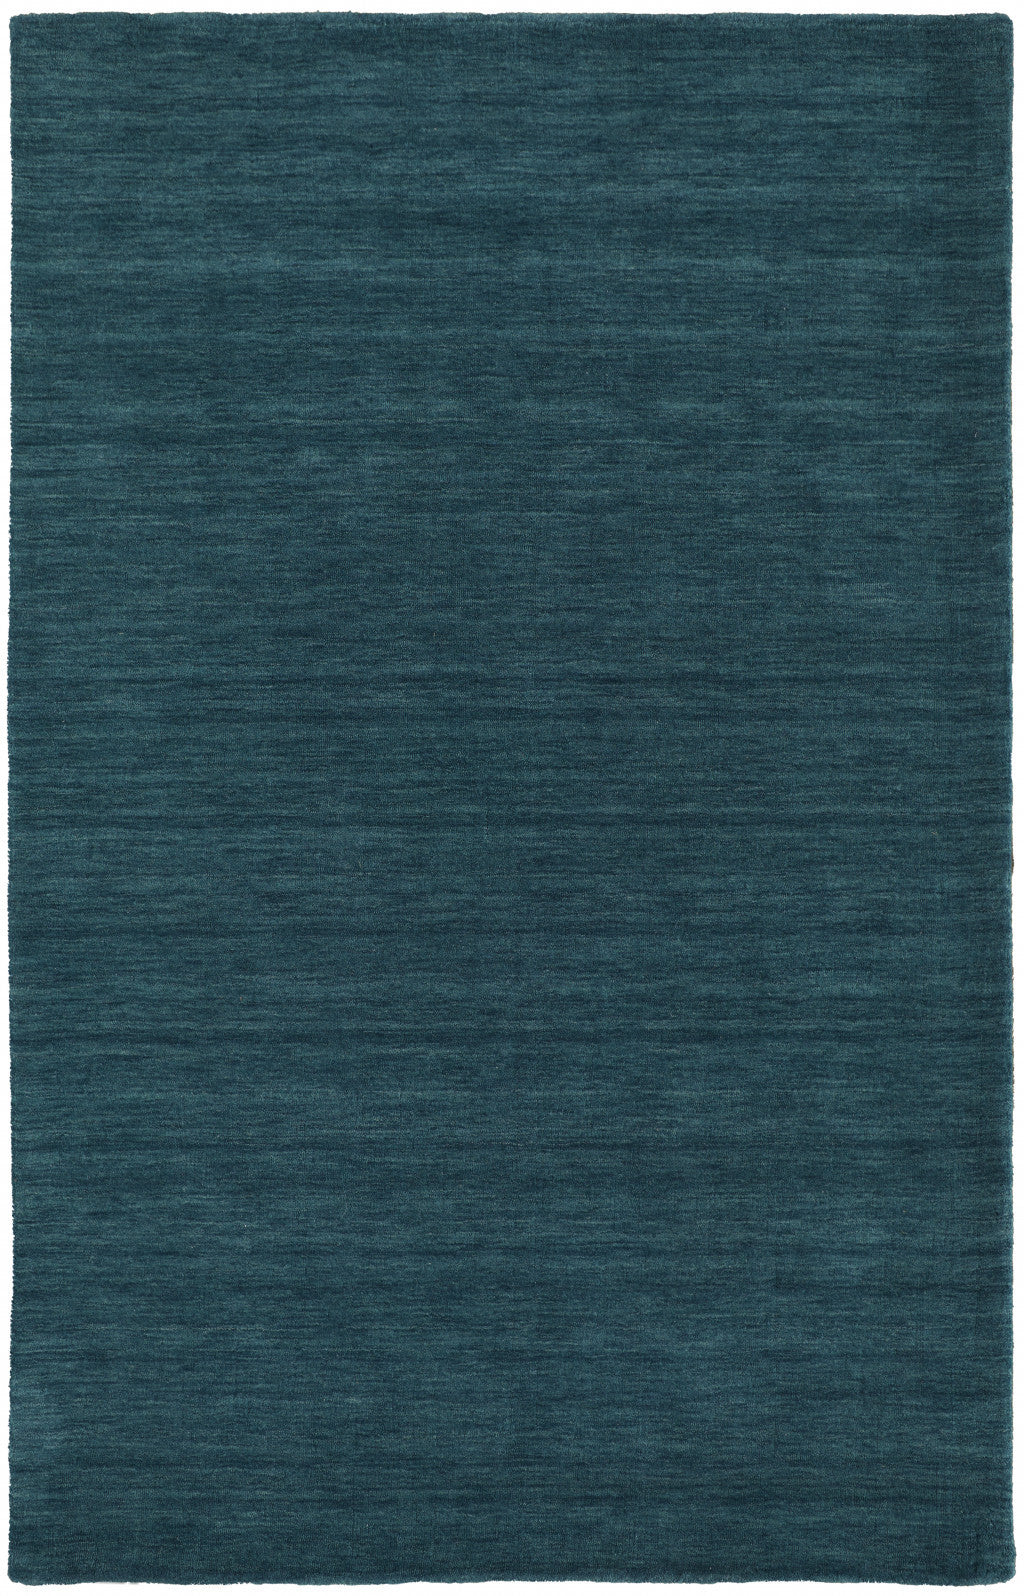 5' X 8' Blue Wool Hand Woven Stain Resistant Area Rug